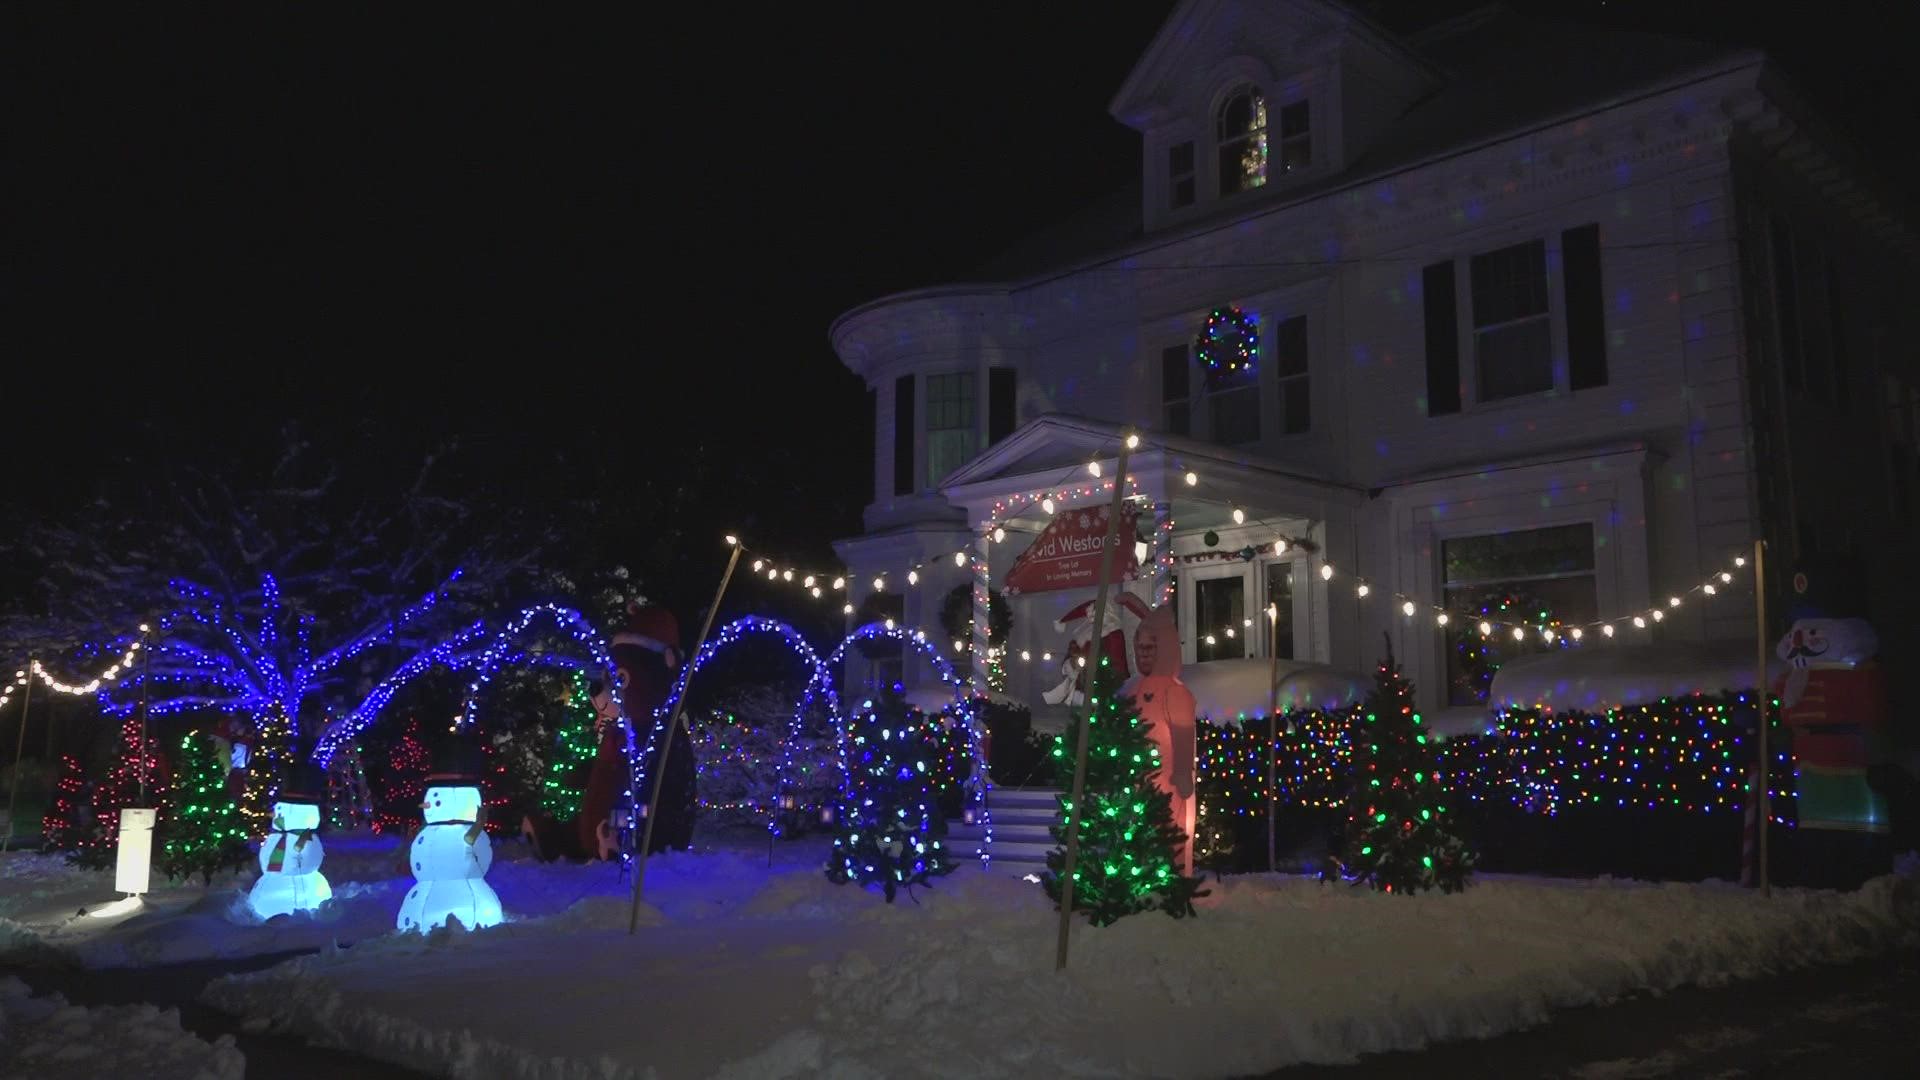 Sarah Weston and her family have decorated their Kennebunk home for the 2021 Holiday Trail of Lights contest in memory of her dad who died with COVID-19 last year.